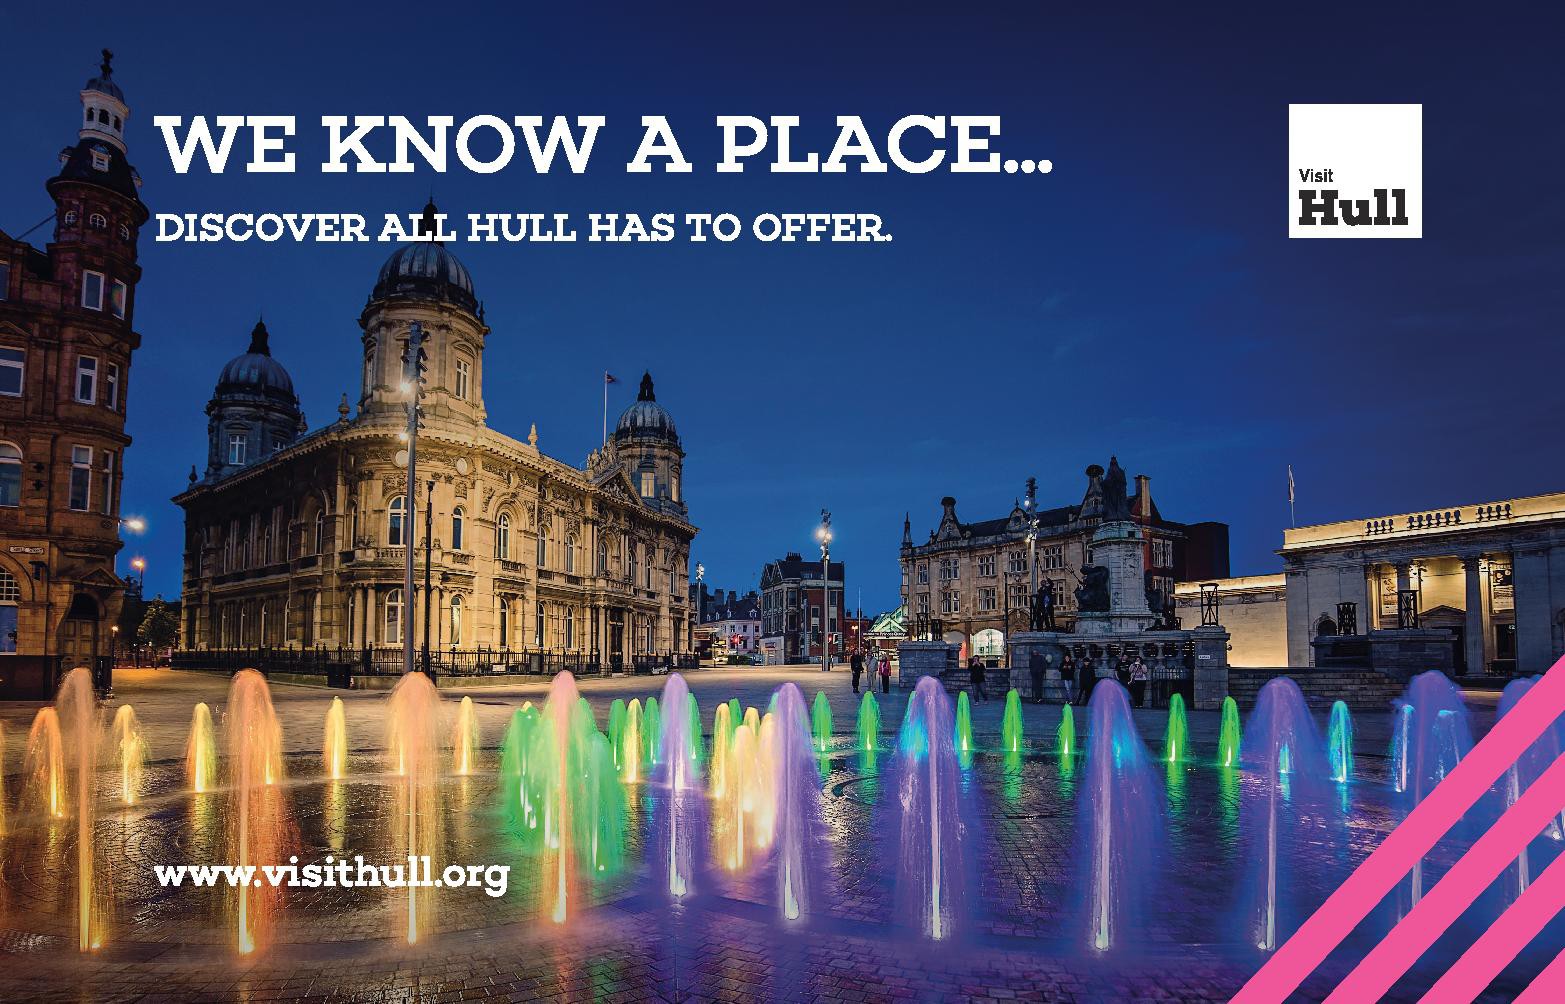 Discover all Hull has to offer